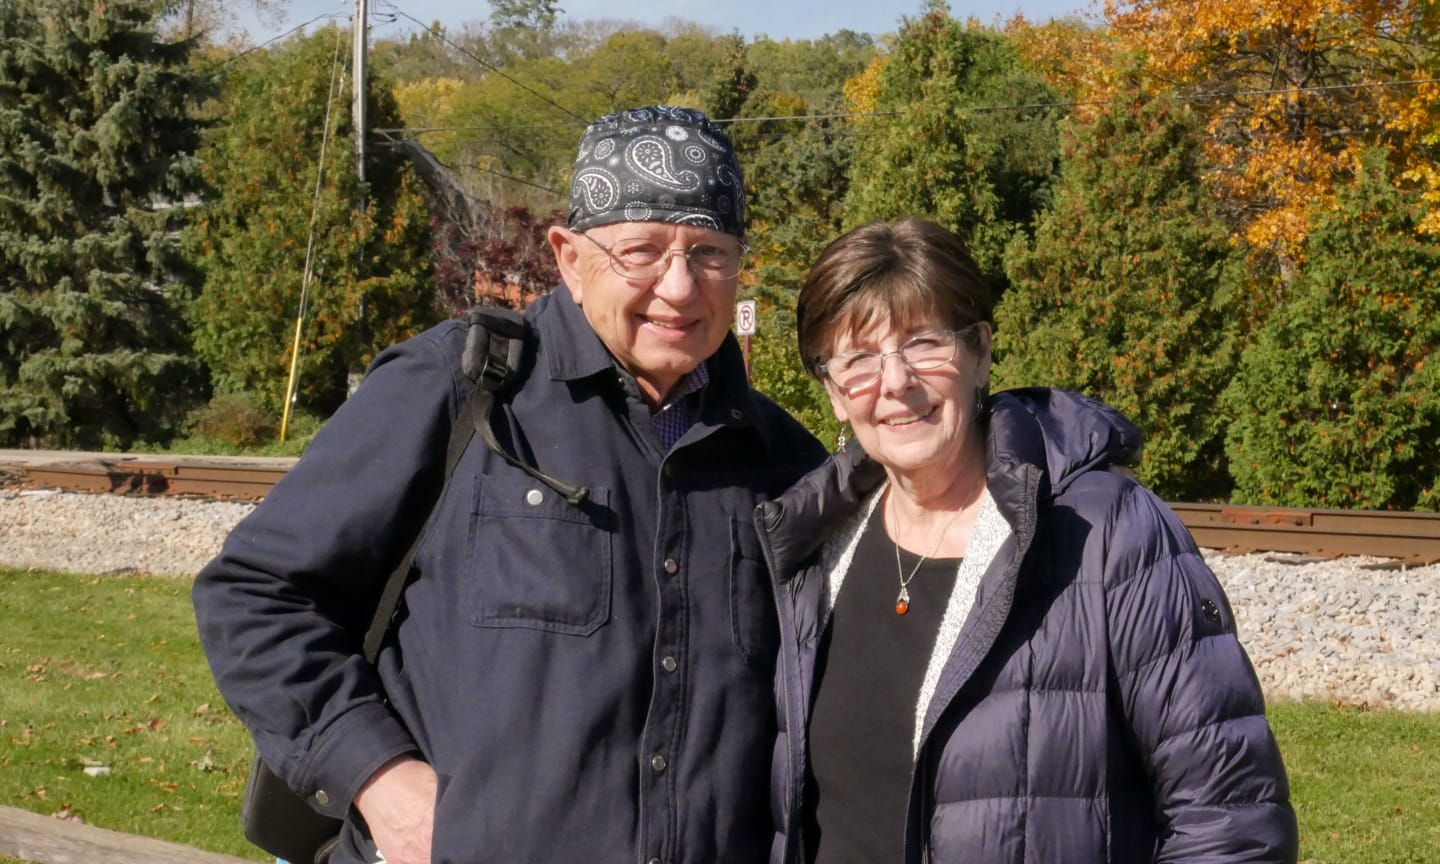 Daniel Ferguson and his wife Rene standing in front of railroad tracks on a fall day